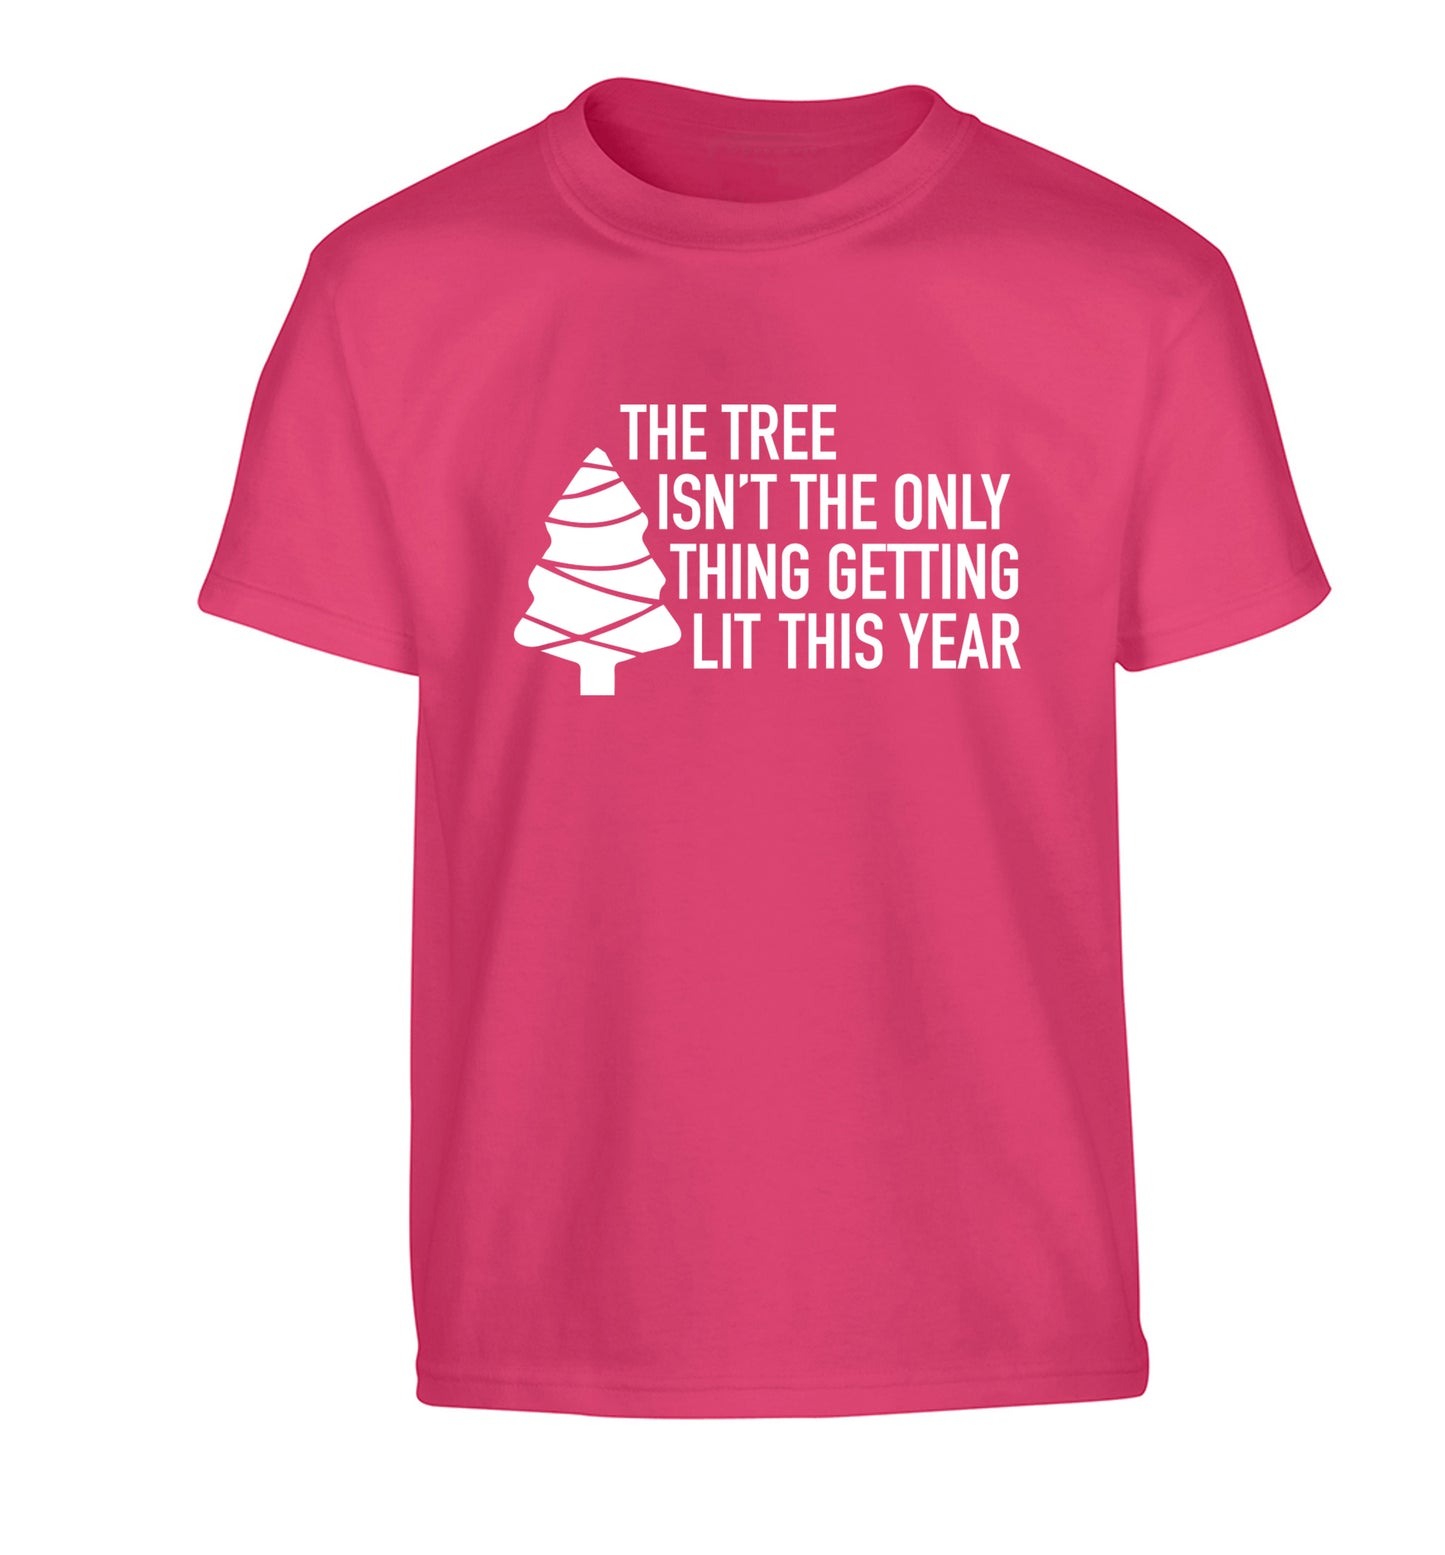 The tree isn't the only thing getting lit this year Children's pink Tshirt 12-14 Years